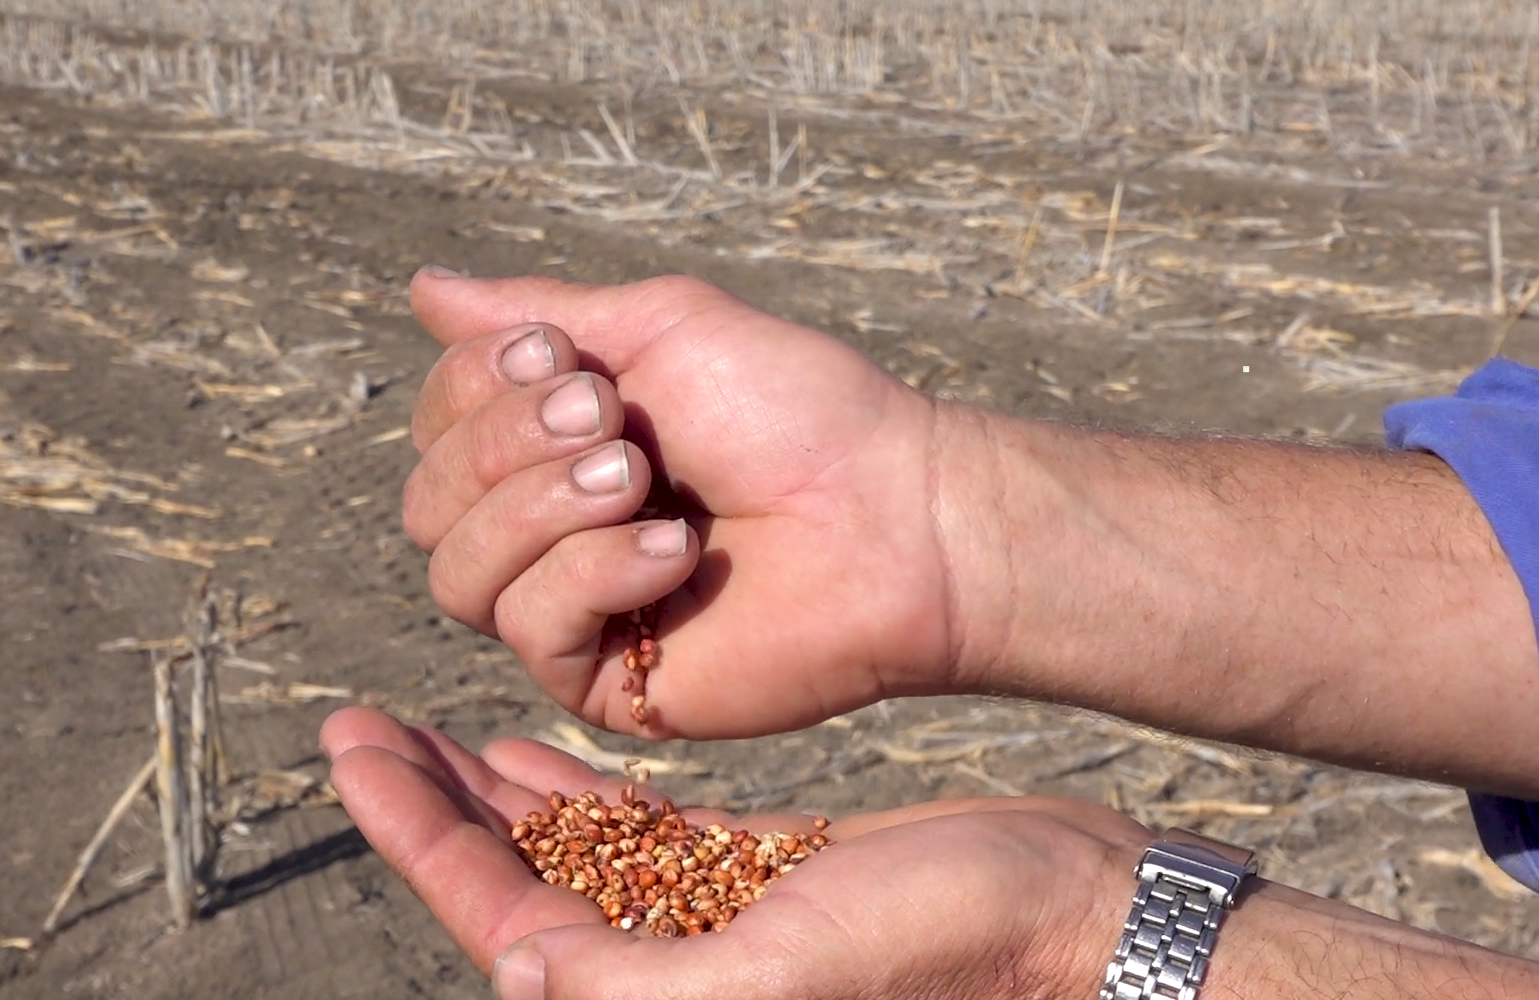 close up of a man's hands pouring seeds from one hand into the palm of the other. in the background is dry, dead crops